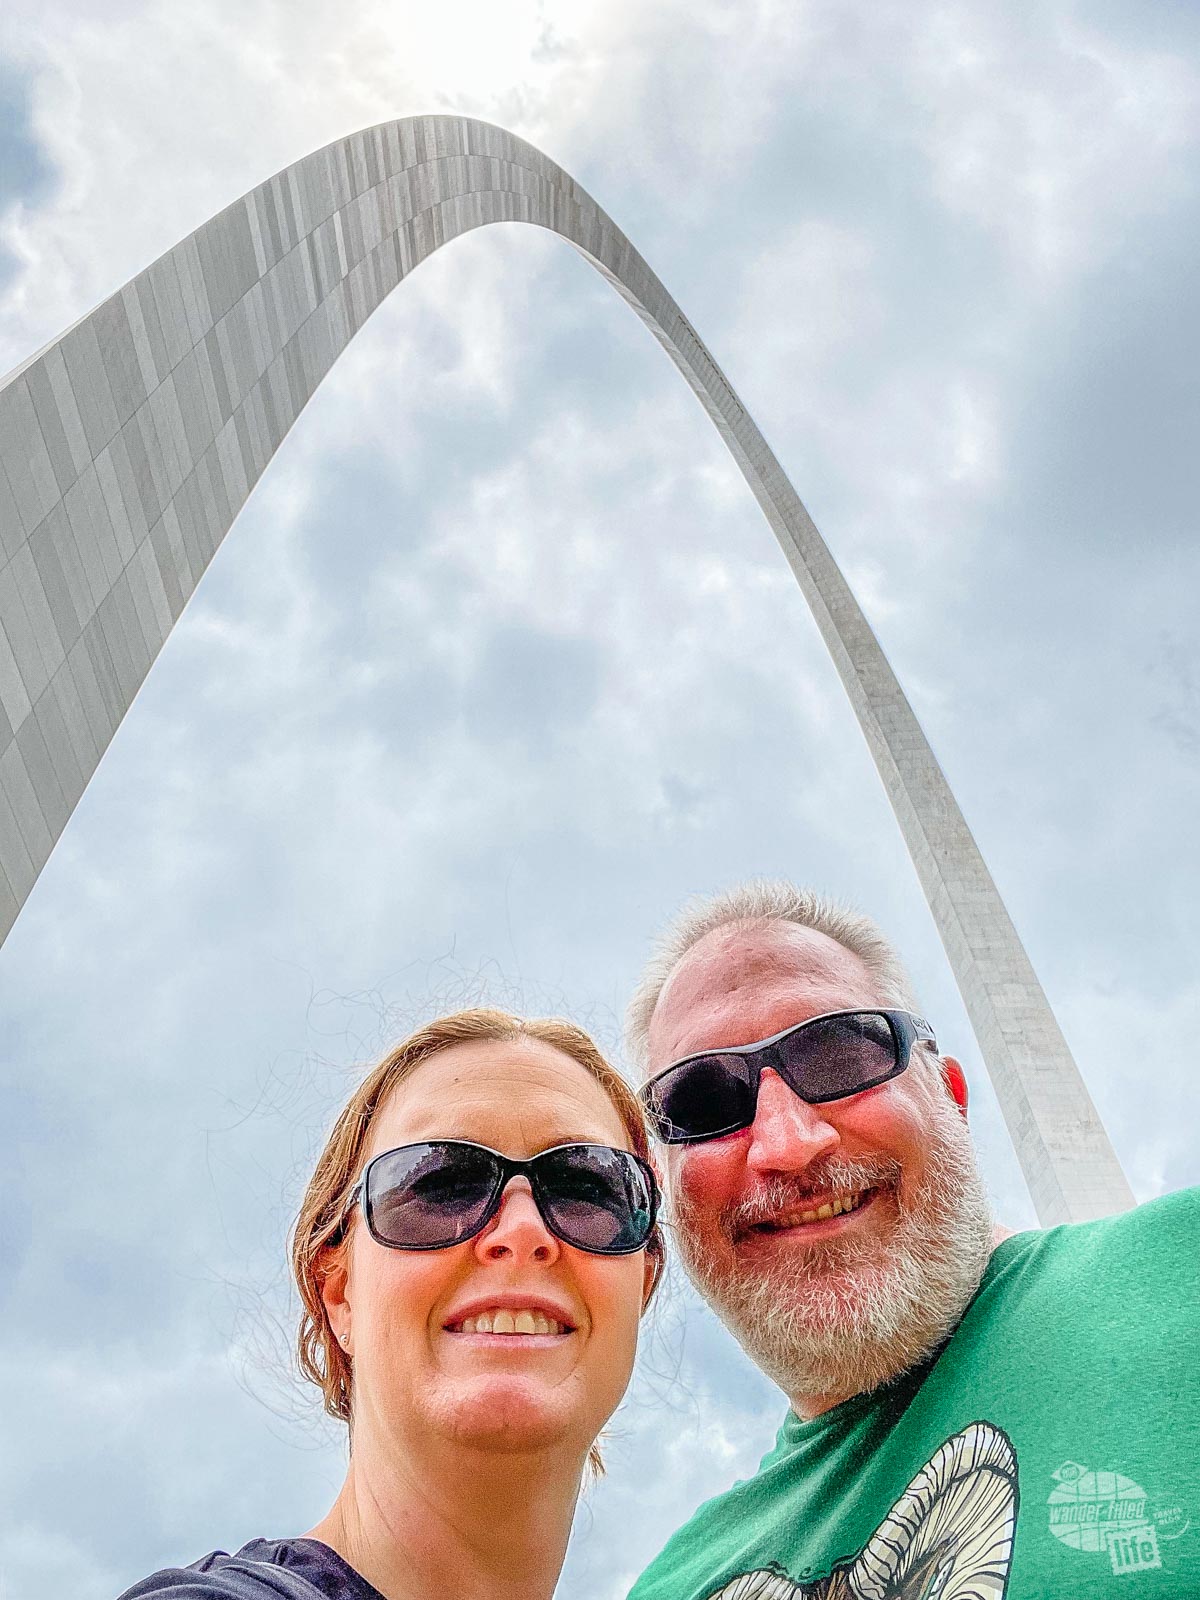 Gotta take a selfie when visiting the Arch!